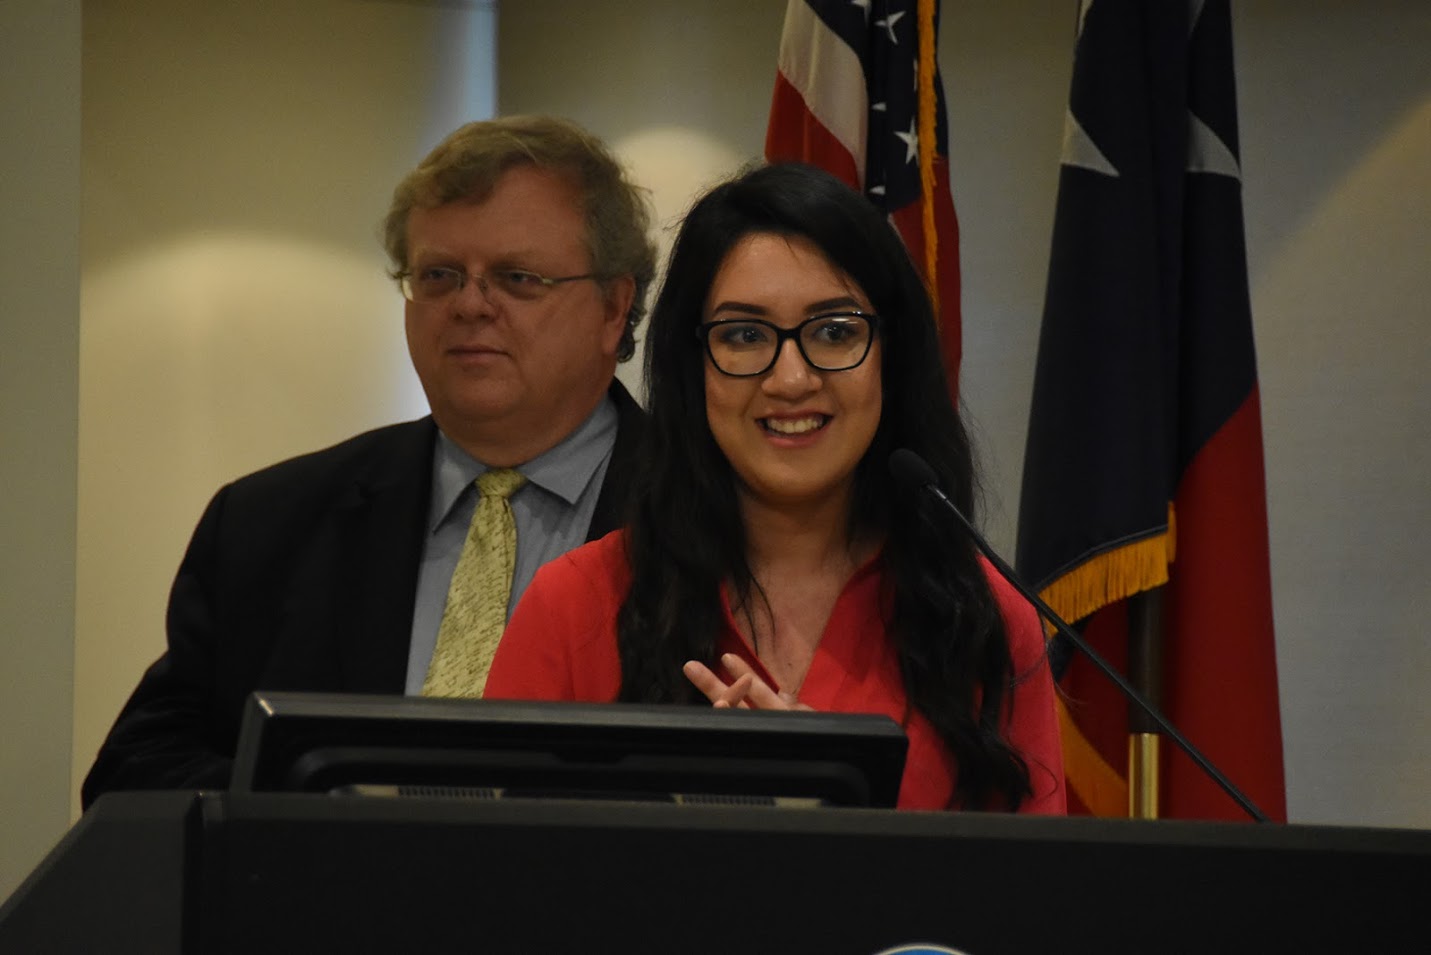 Cy-Fair senior Kathy Guerra stands with state Sen. Paul Bettencourt, R-Houston, at a press conference at Lone Star College on Wed., March 23, 2016.